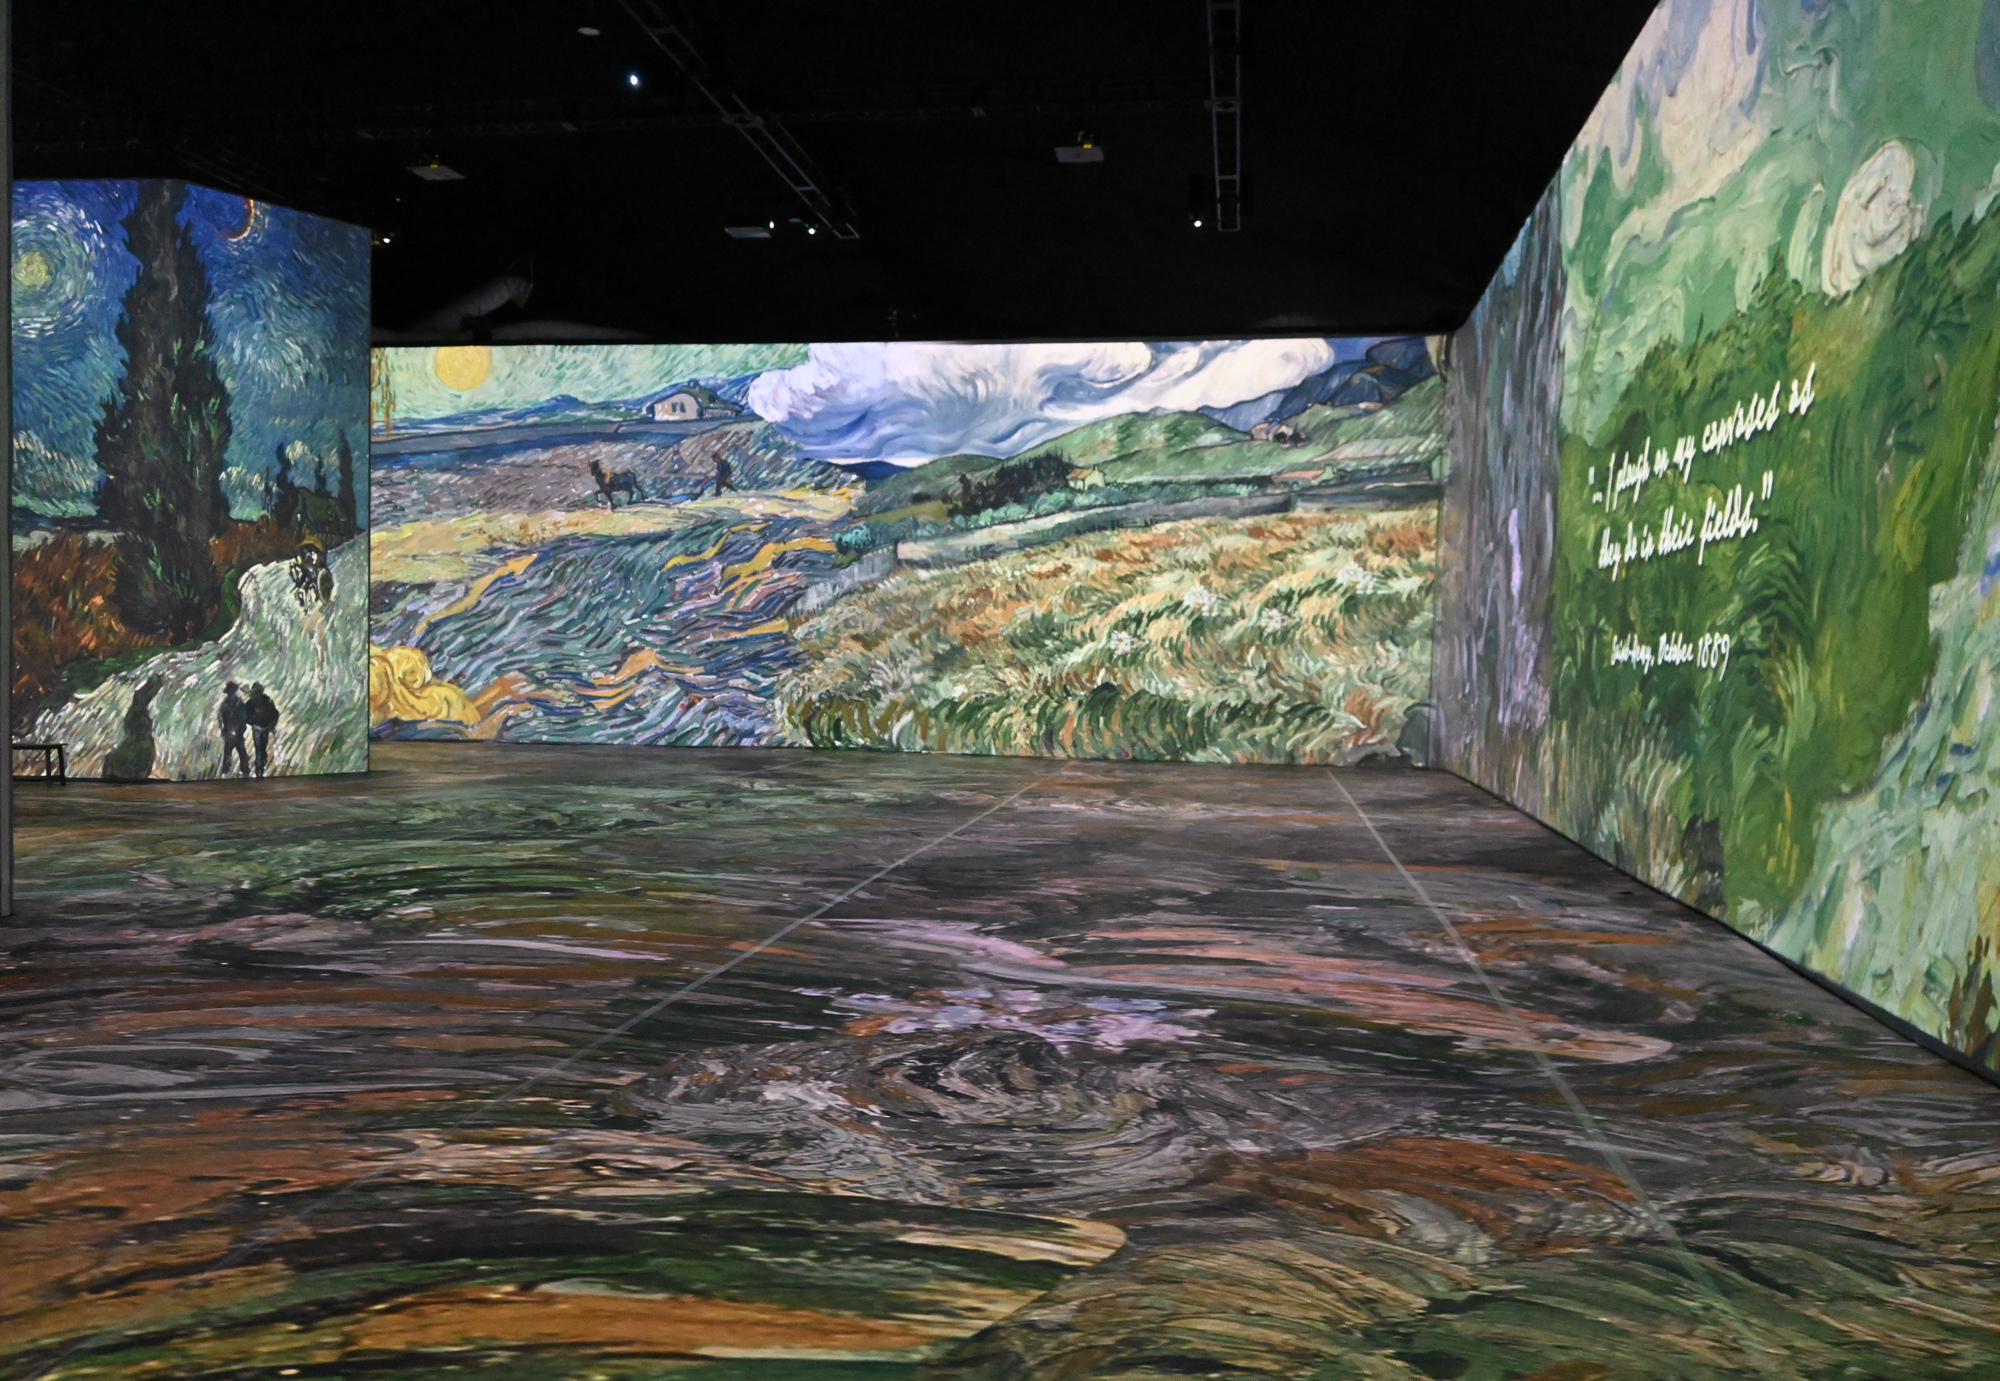 The Van Gogh immersive exhibit is entering its final days in Sarasota. (Photo by Spencer Fordin).